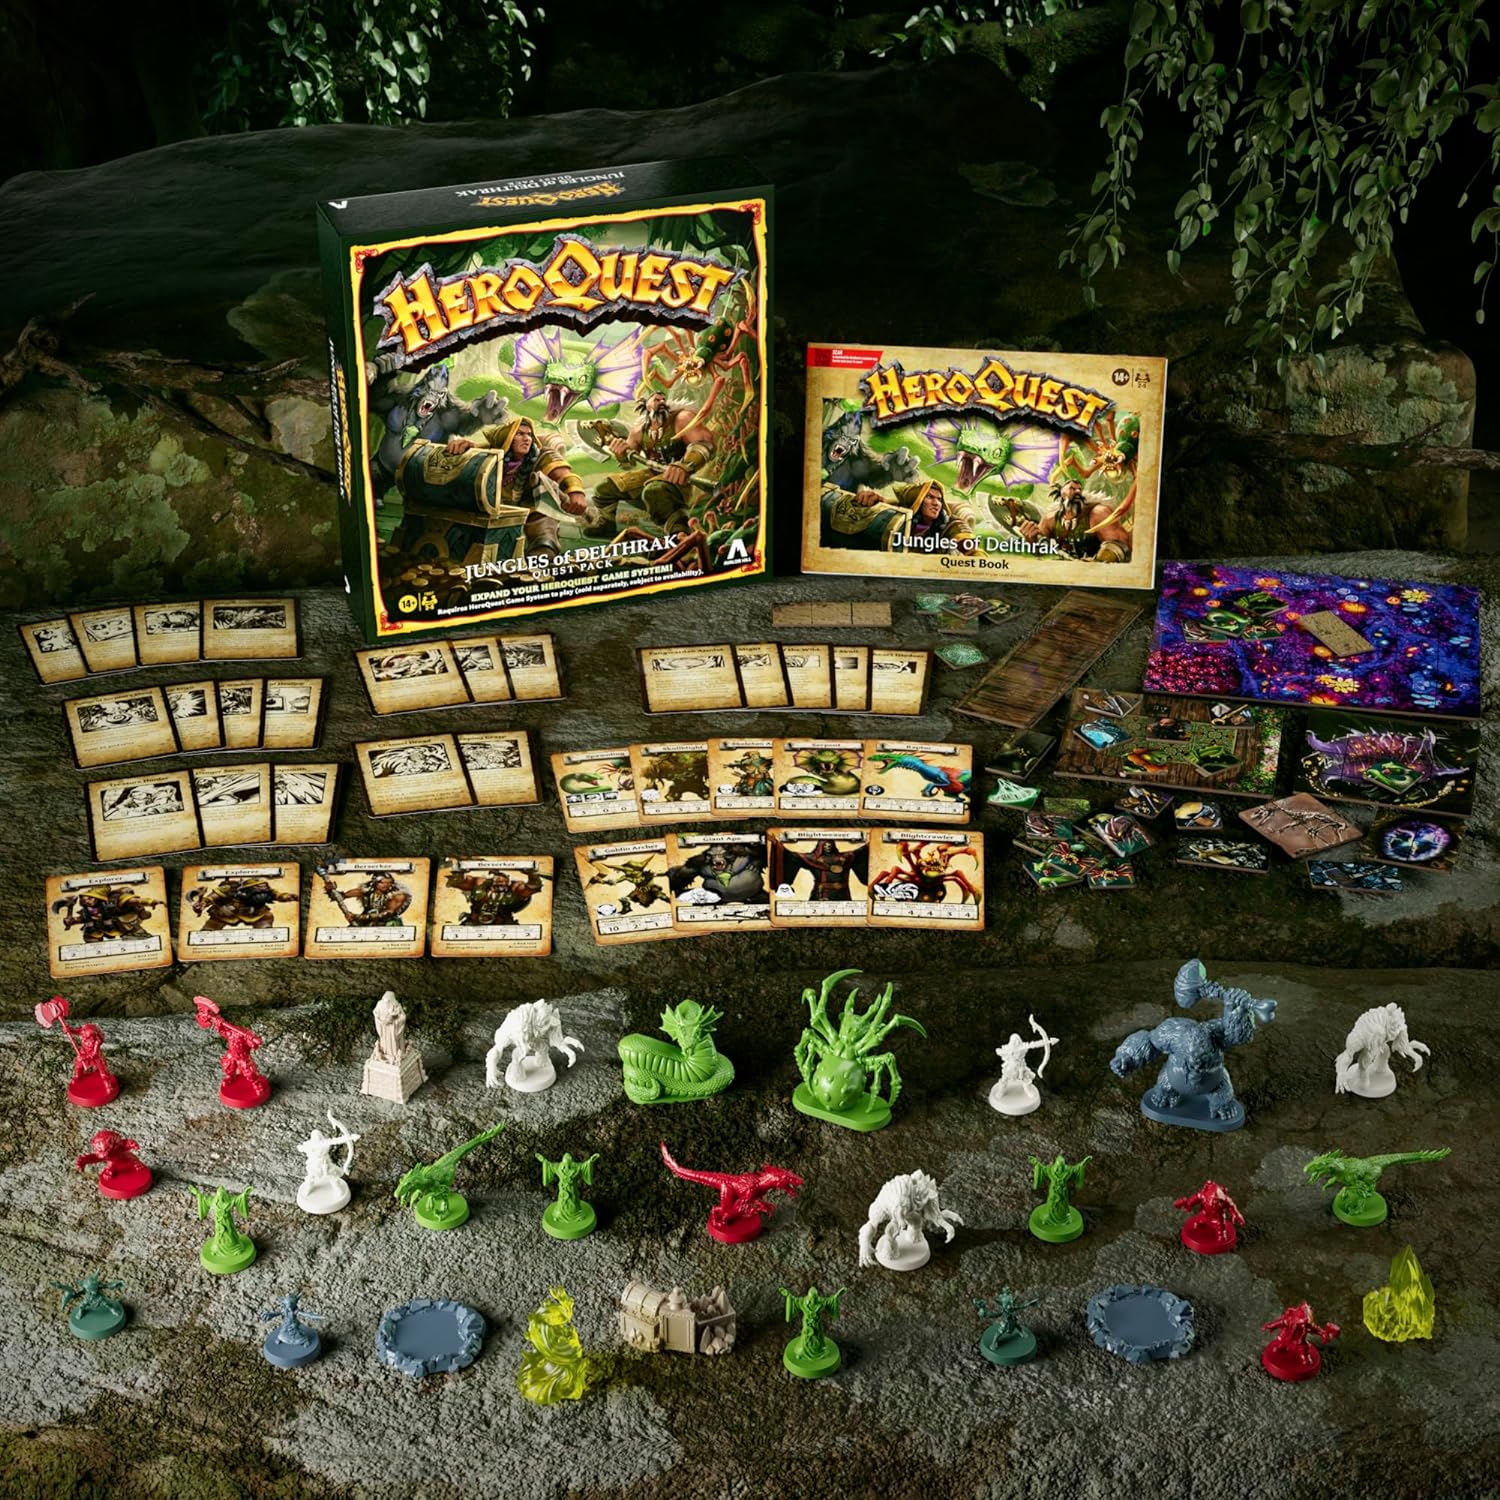 HeroQuest Jungles of Delthrak Quest Pack components including minis and cards